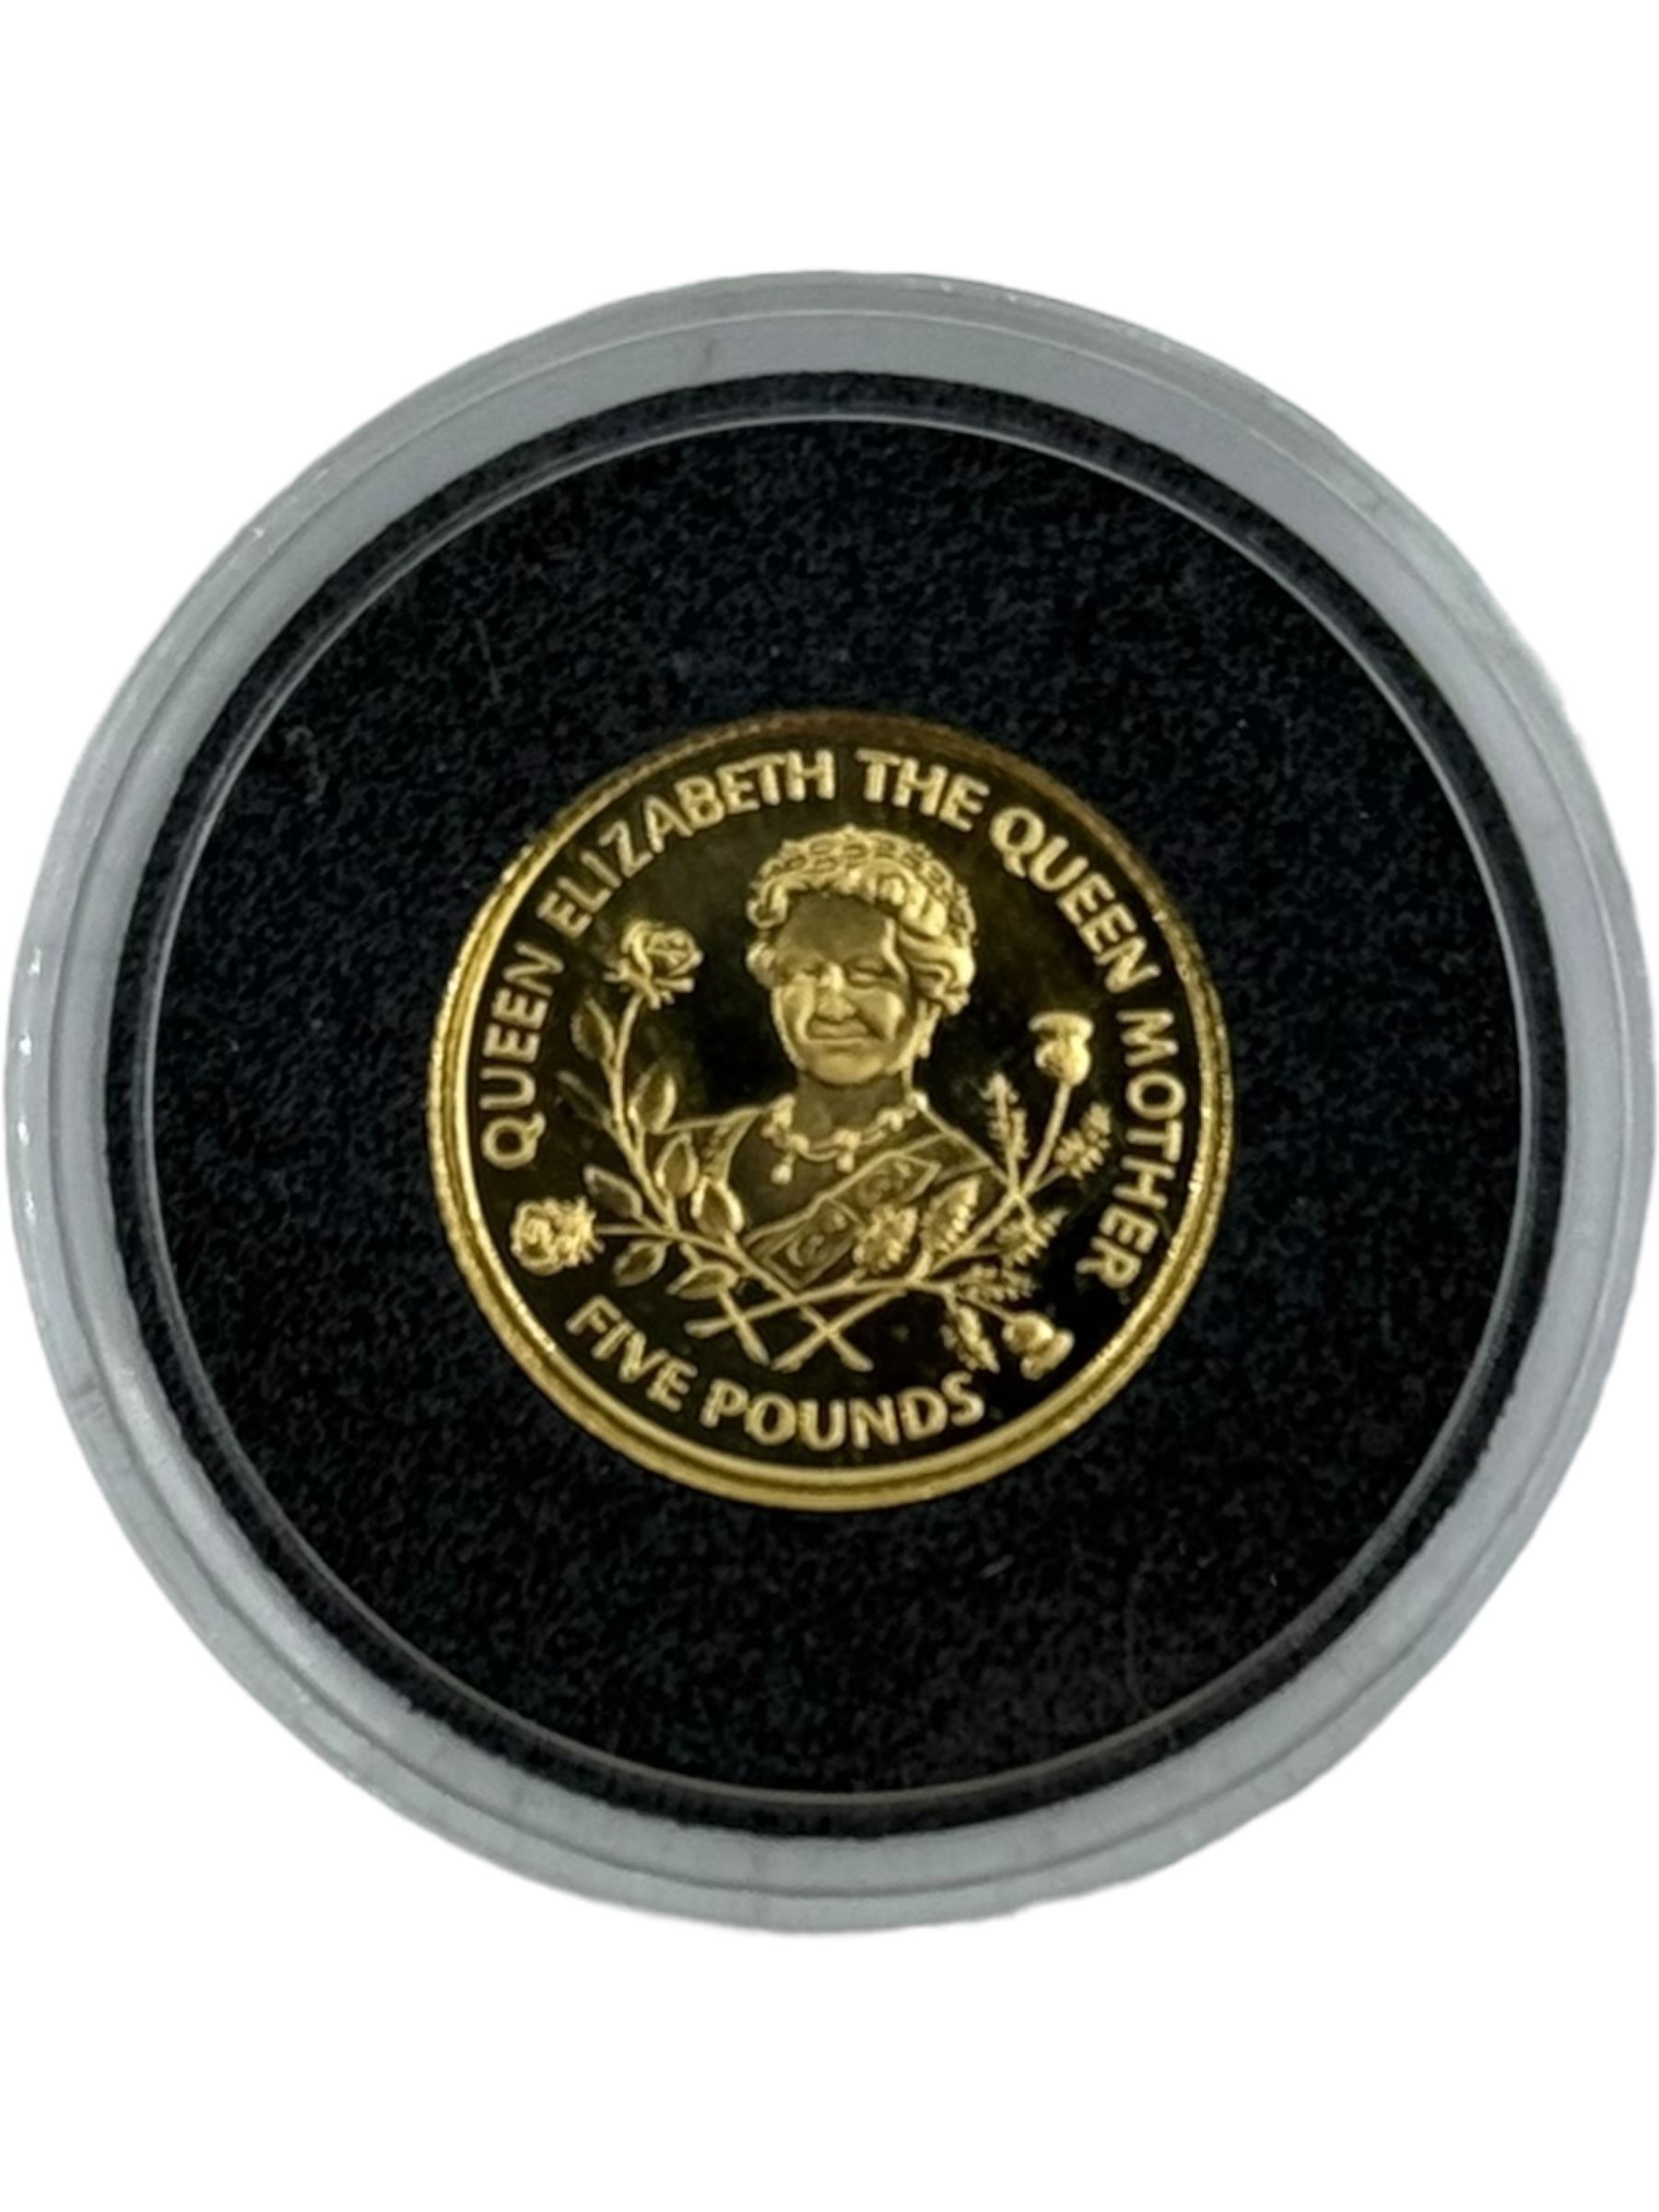 Four one twenty-fifth of an ounce 24 carat gold coins - Image 6 of 9